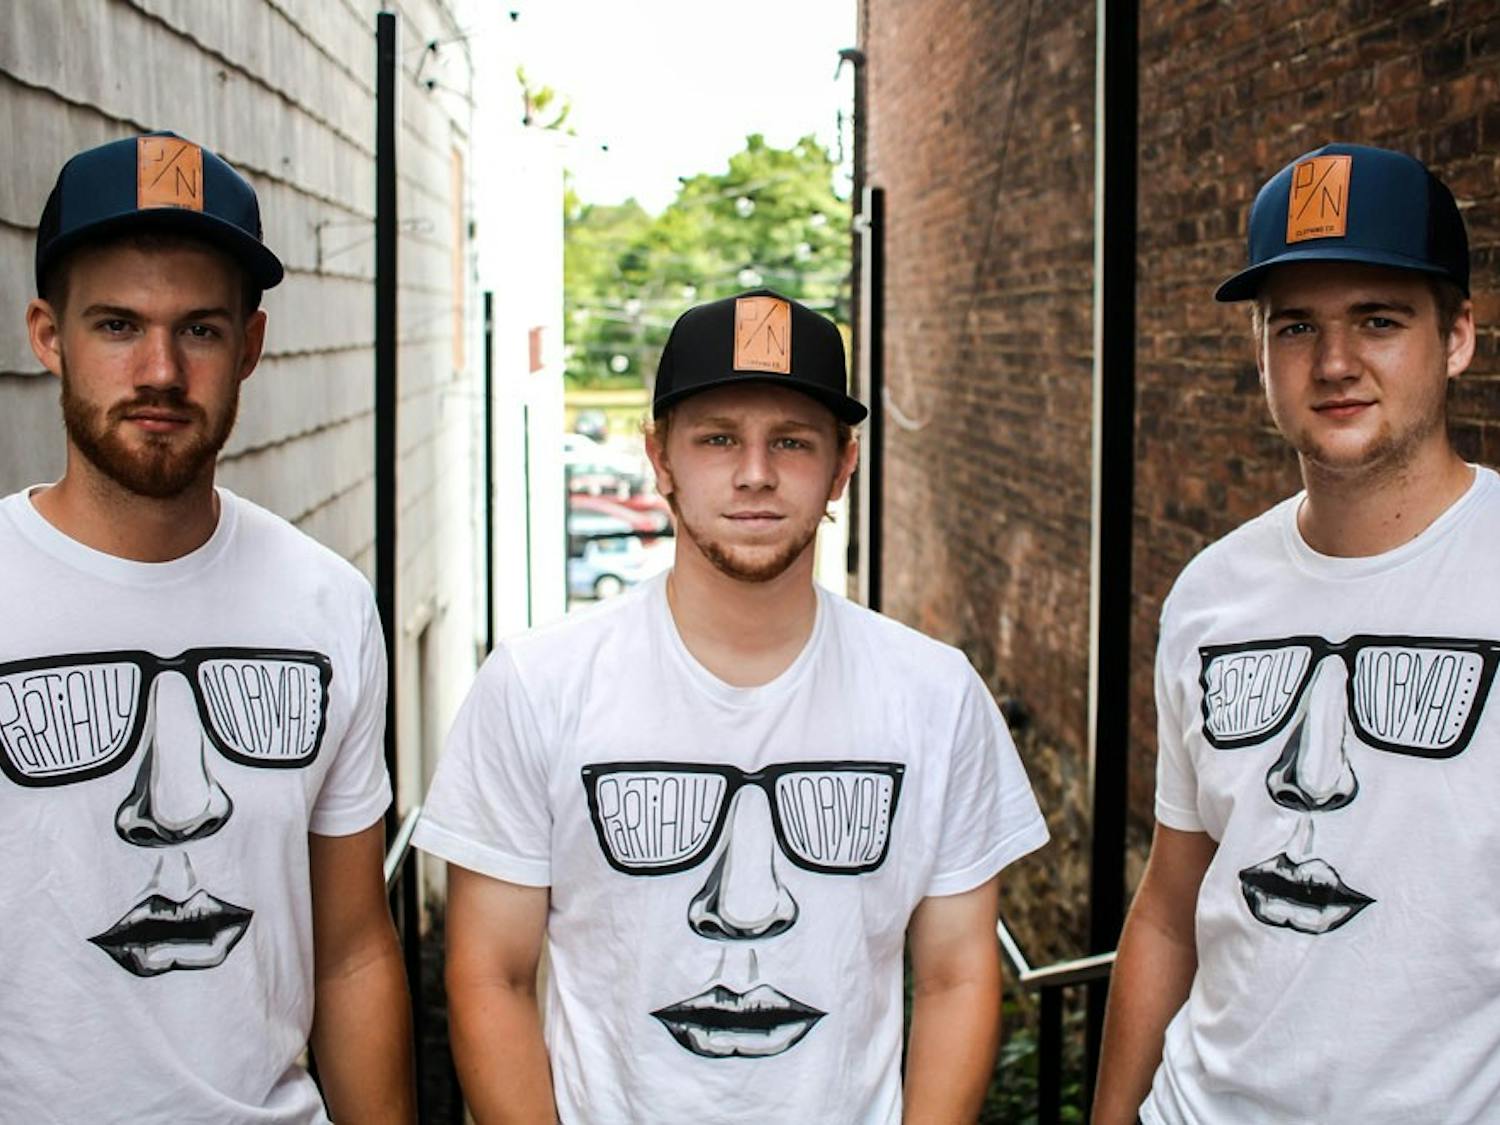 Brendan Cox, Ryan Thompson and Evan Cox the creators of Partially Normal Clothing. They currently have hats and t-shirts for sale but plan to include hoodies in their upcoming fall lineup.